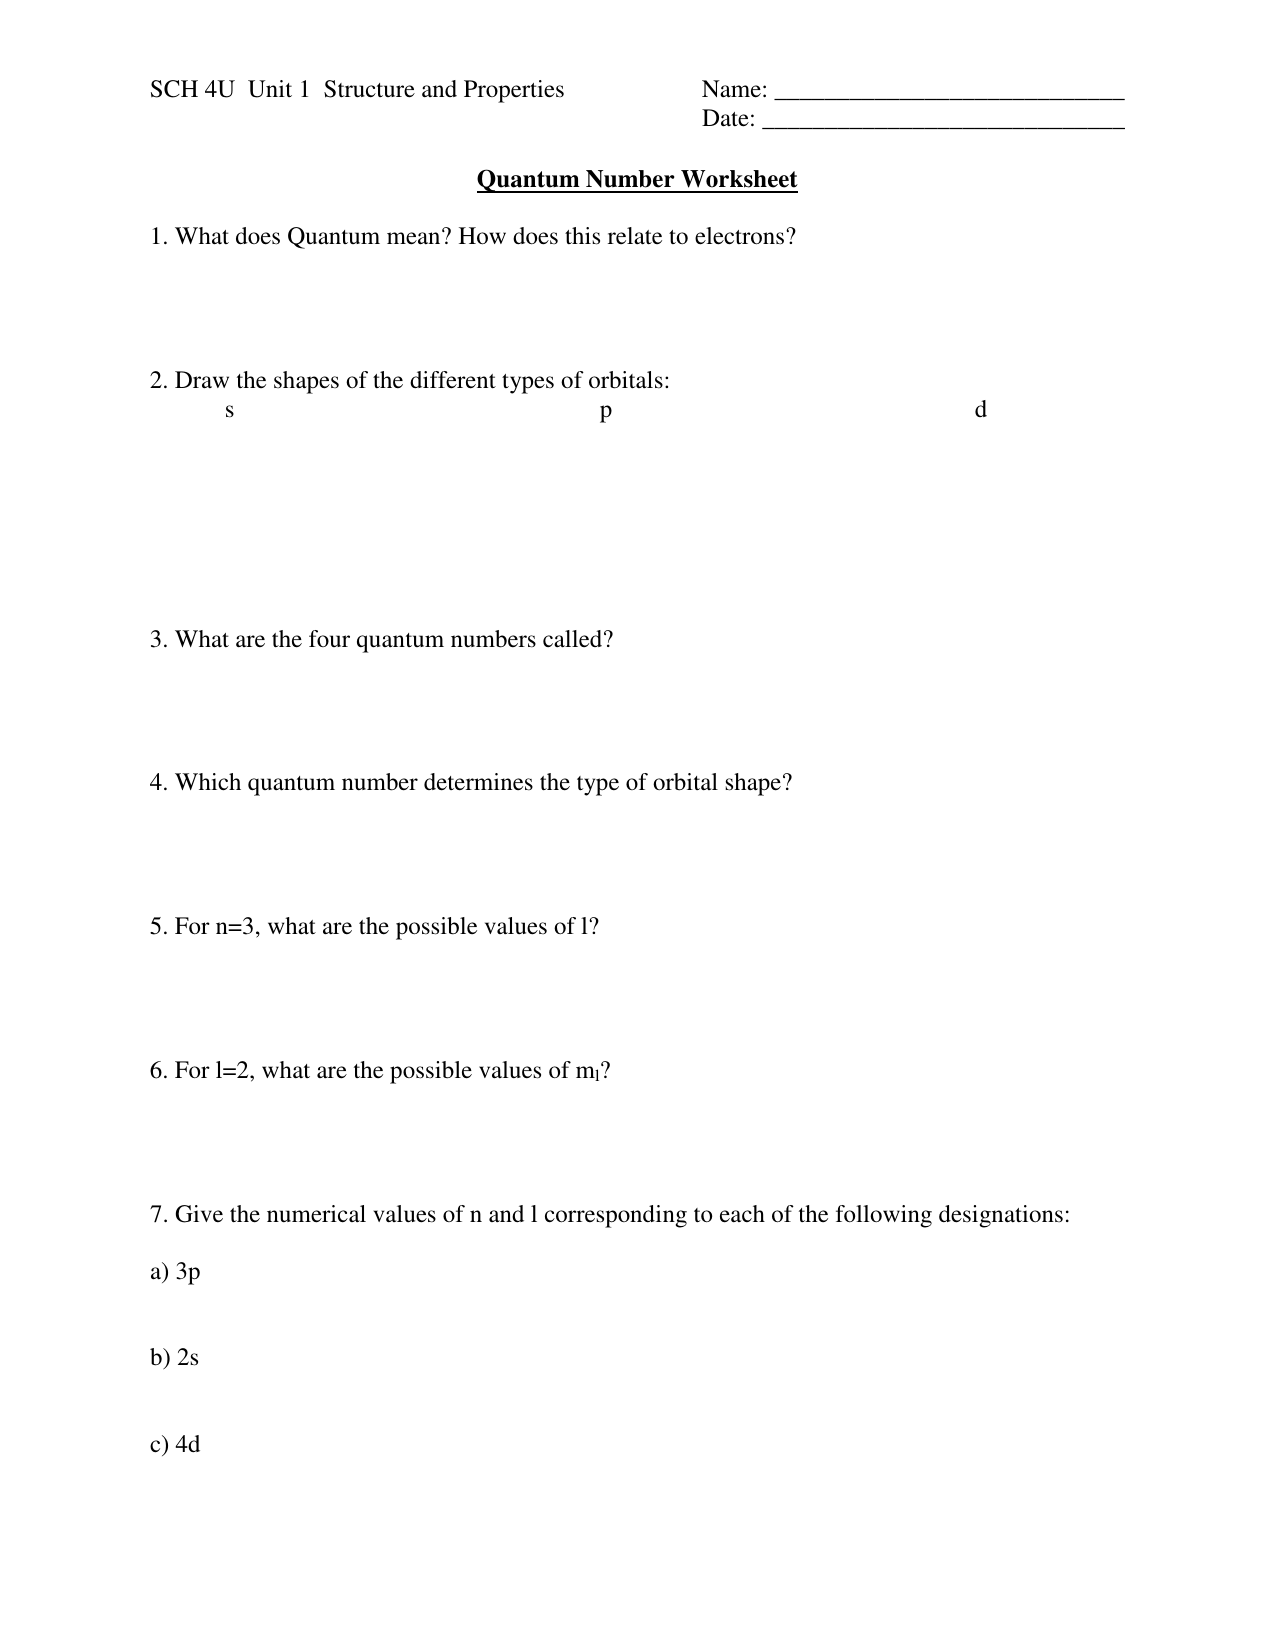 Quantum Number Worksheet - SCH25U-SCHS For Quantum Numbers Worksheet Answers